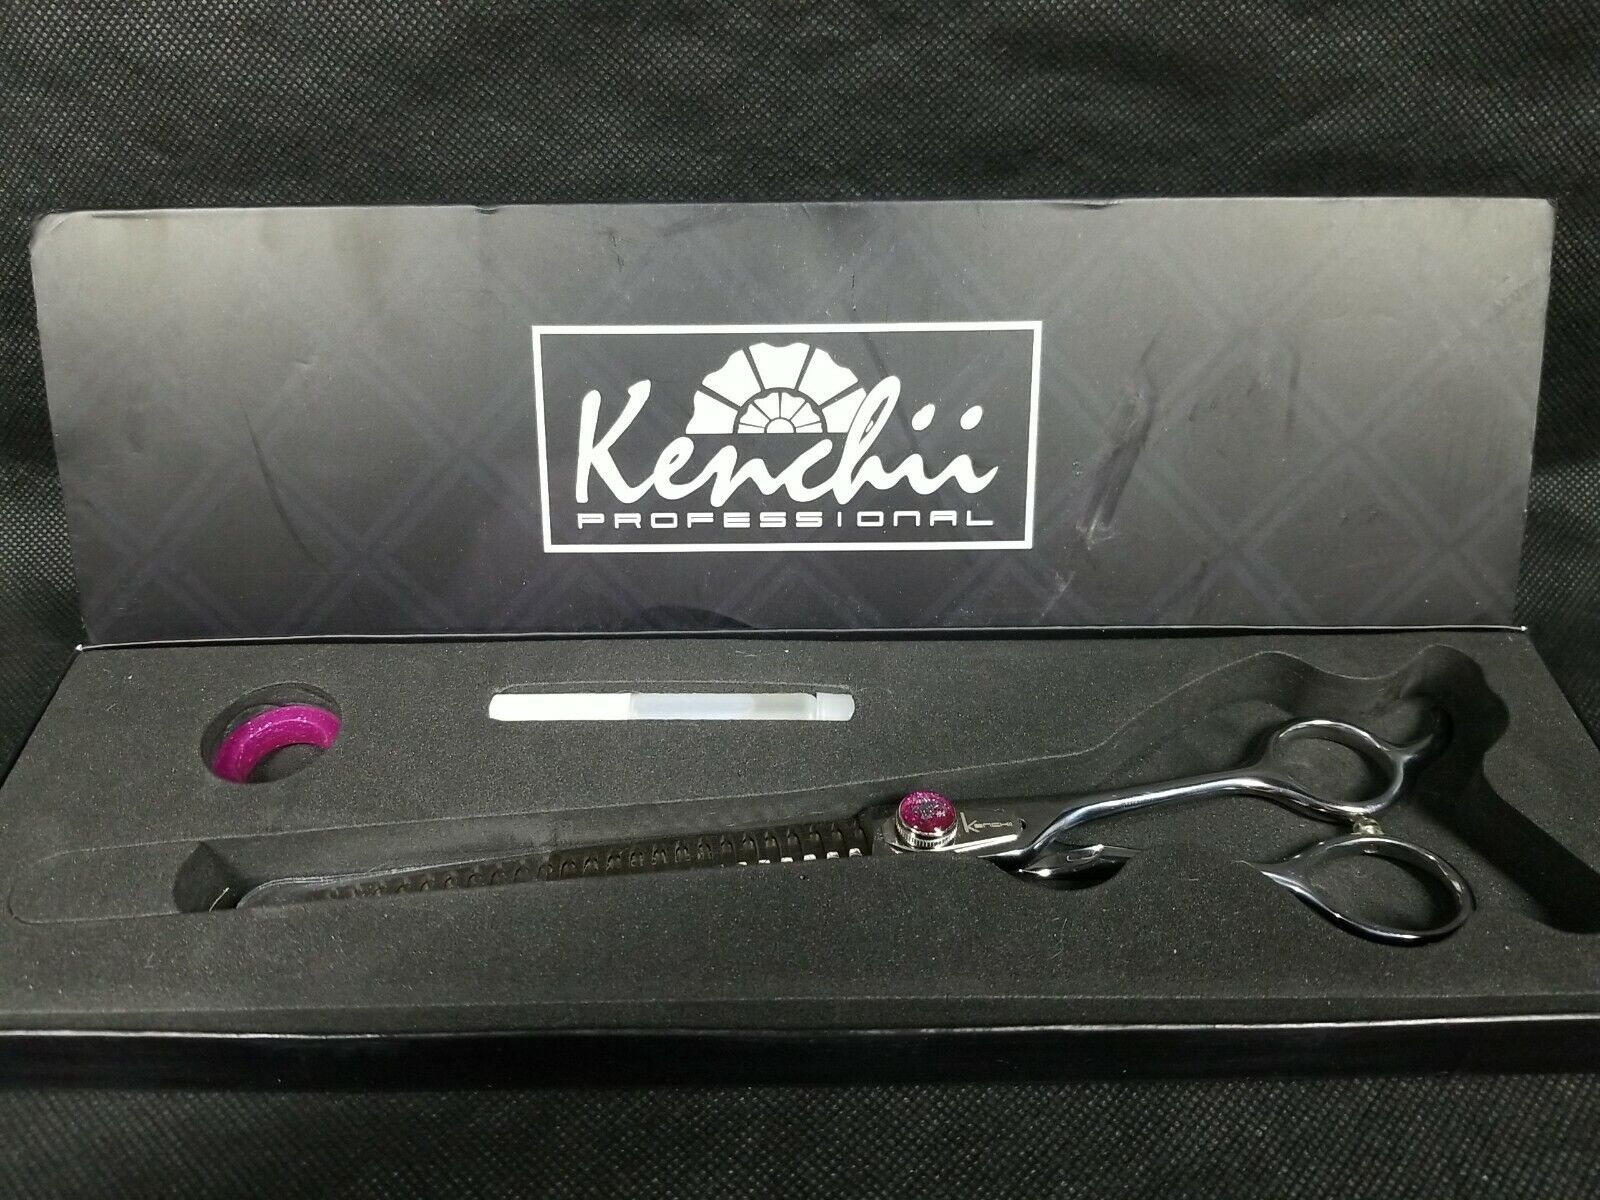 Kenchii Scorpion 24 Tooth Dog Grooming Thinning Shear Open Box Pink Glitter